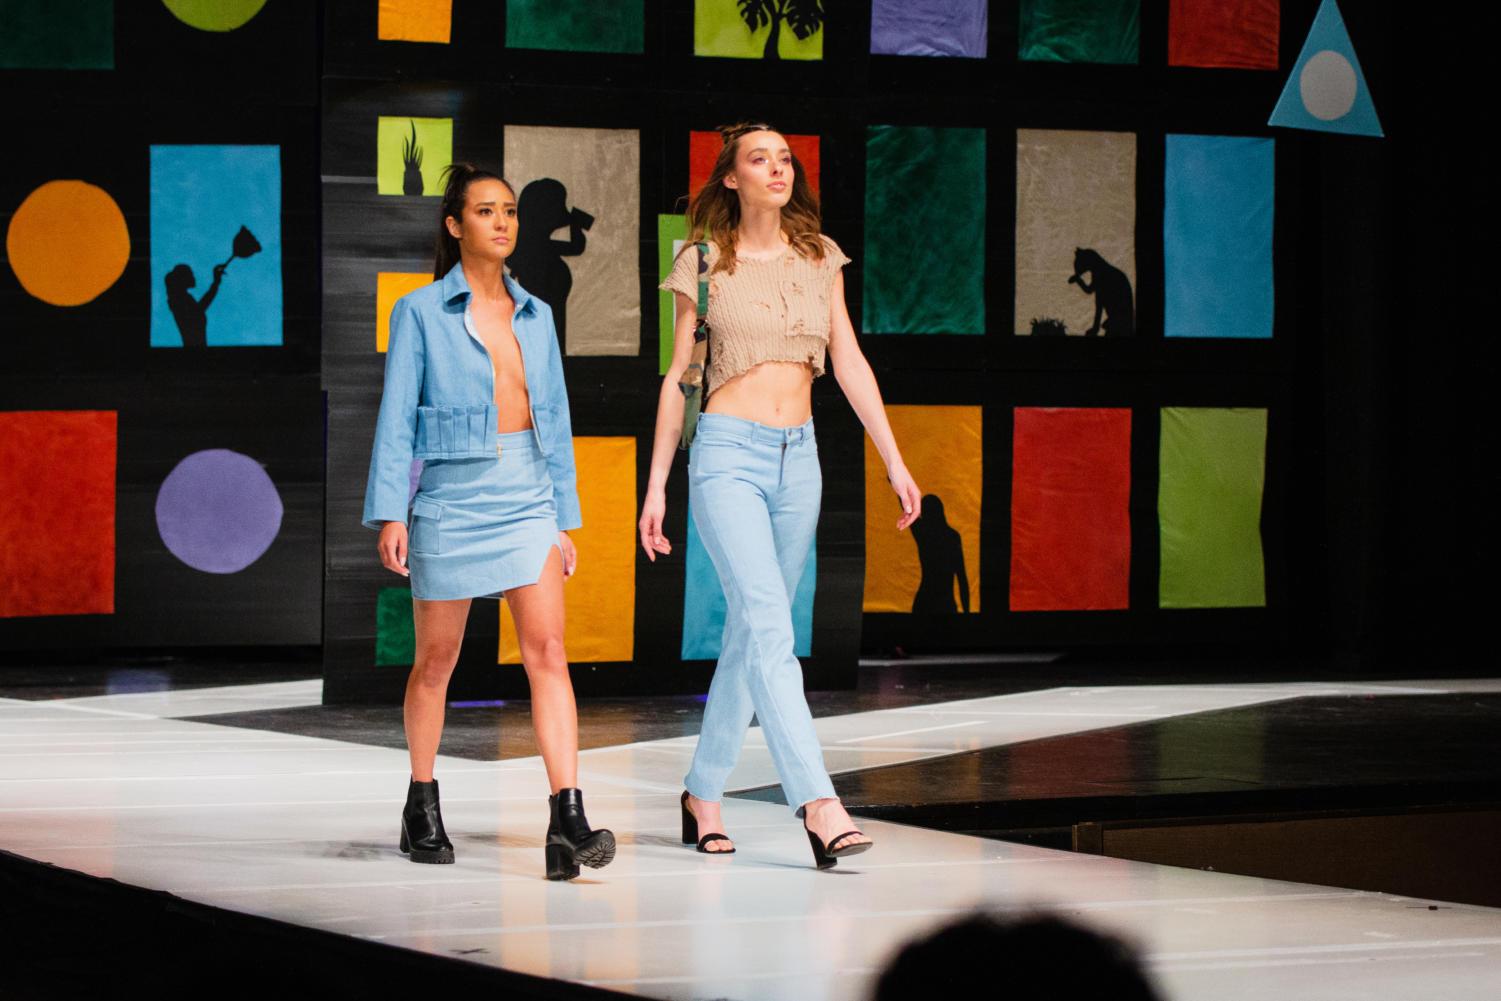 Steve Madden has checked in to The Fashion Show – Iowa State Daily